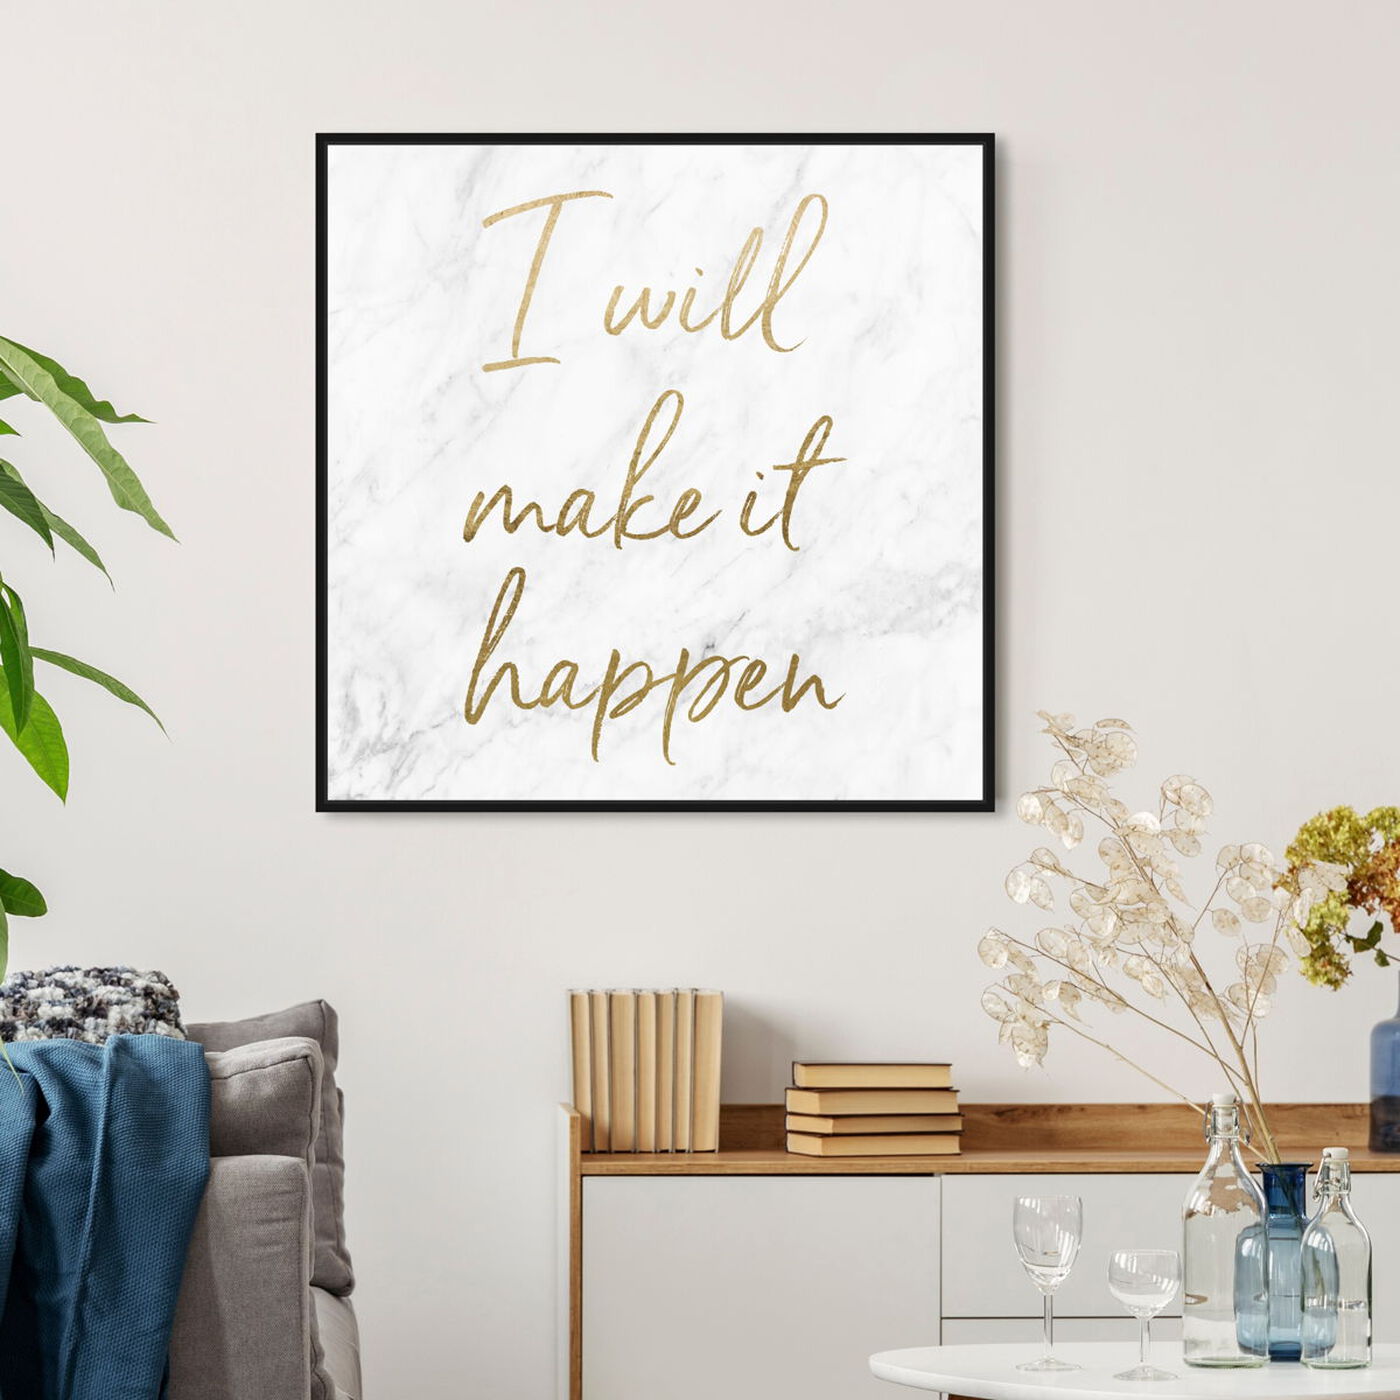 Will It Happen by Oliver Wall | Art Gal Make Quotes Typography I and